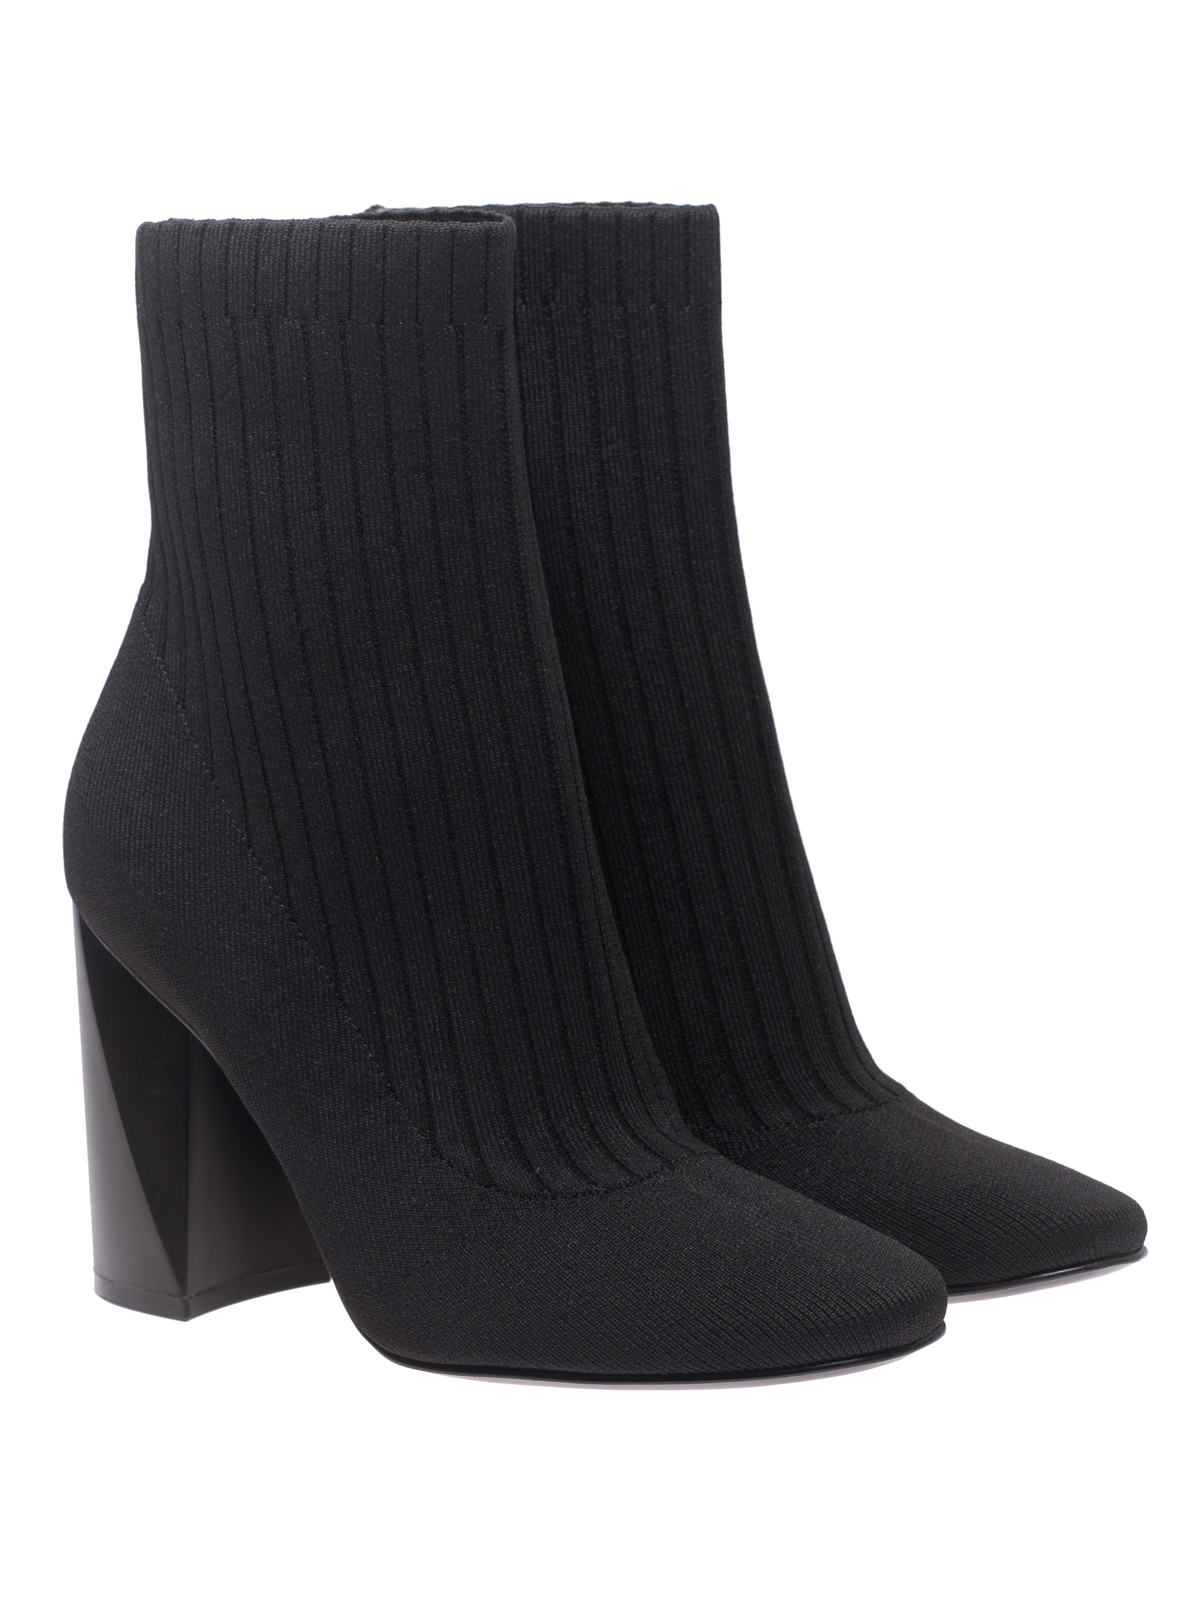 kendall and kylie tina knit boots